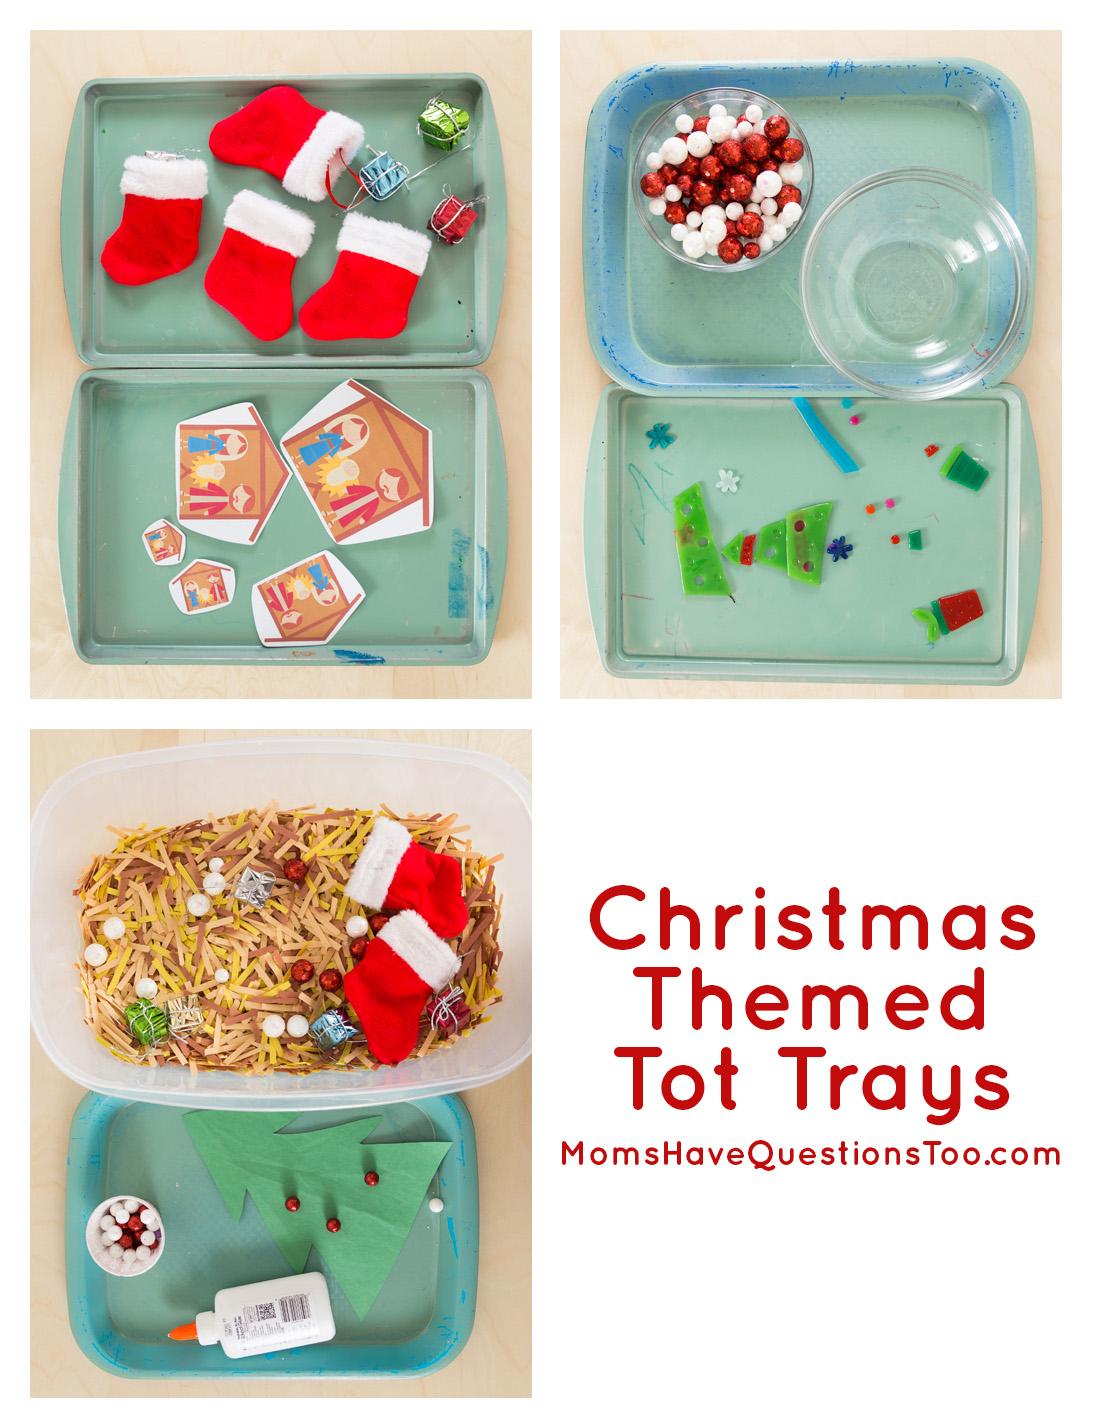 Christmas Tot School Trays - Moms Have Questions Too